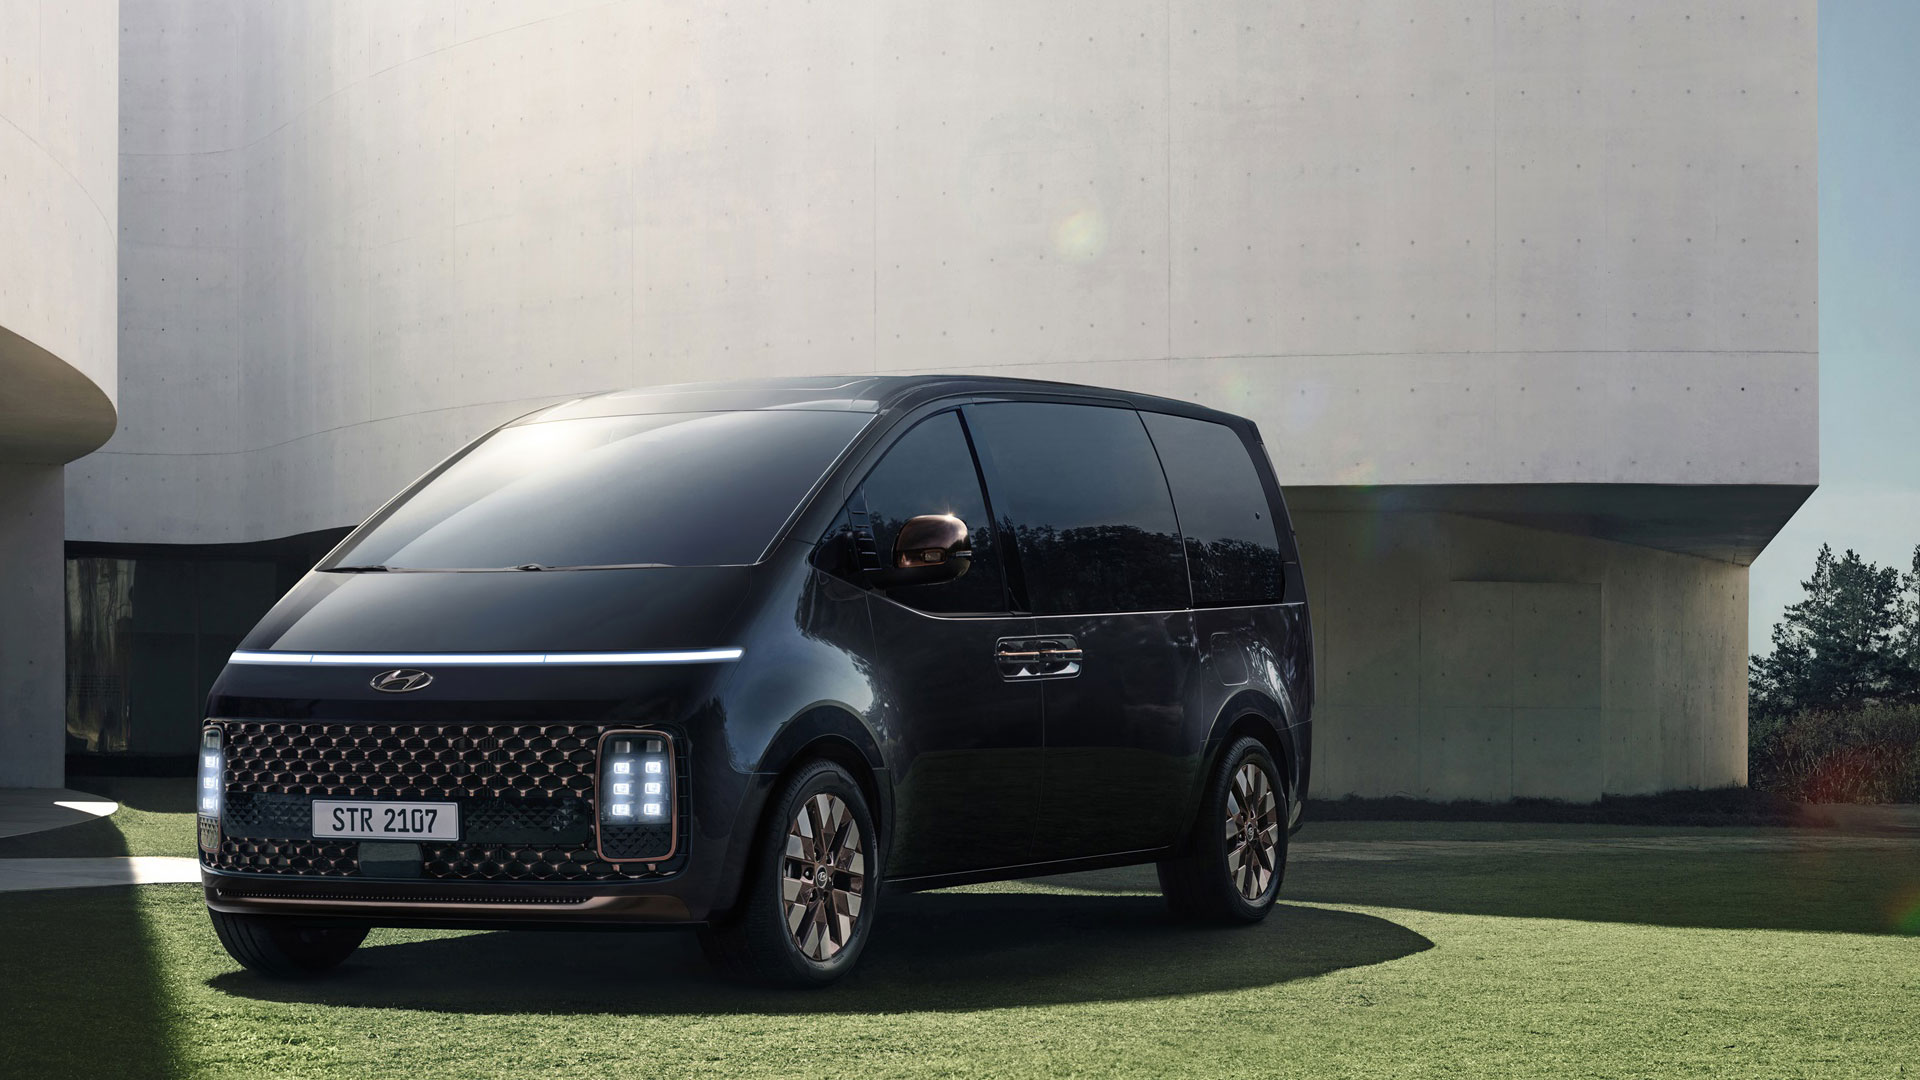 Hyundai Motor’s STARIA MPV Debuts, Pioneering Future of Mobility with Safety and Versatility